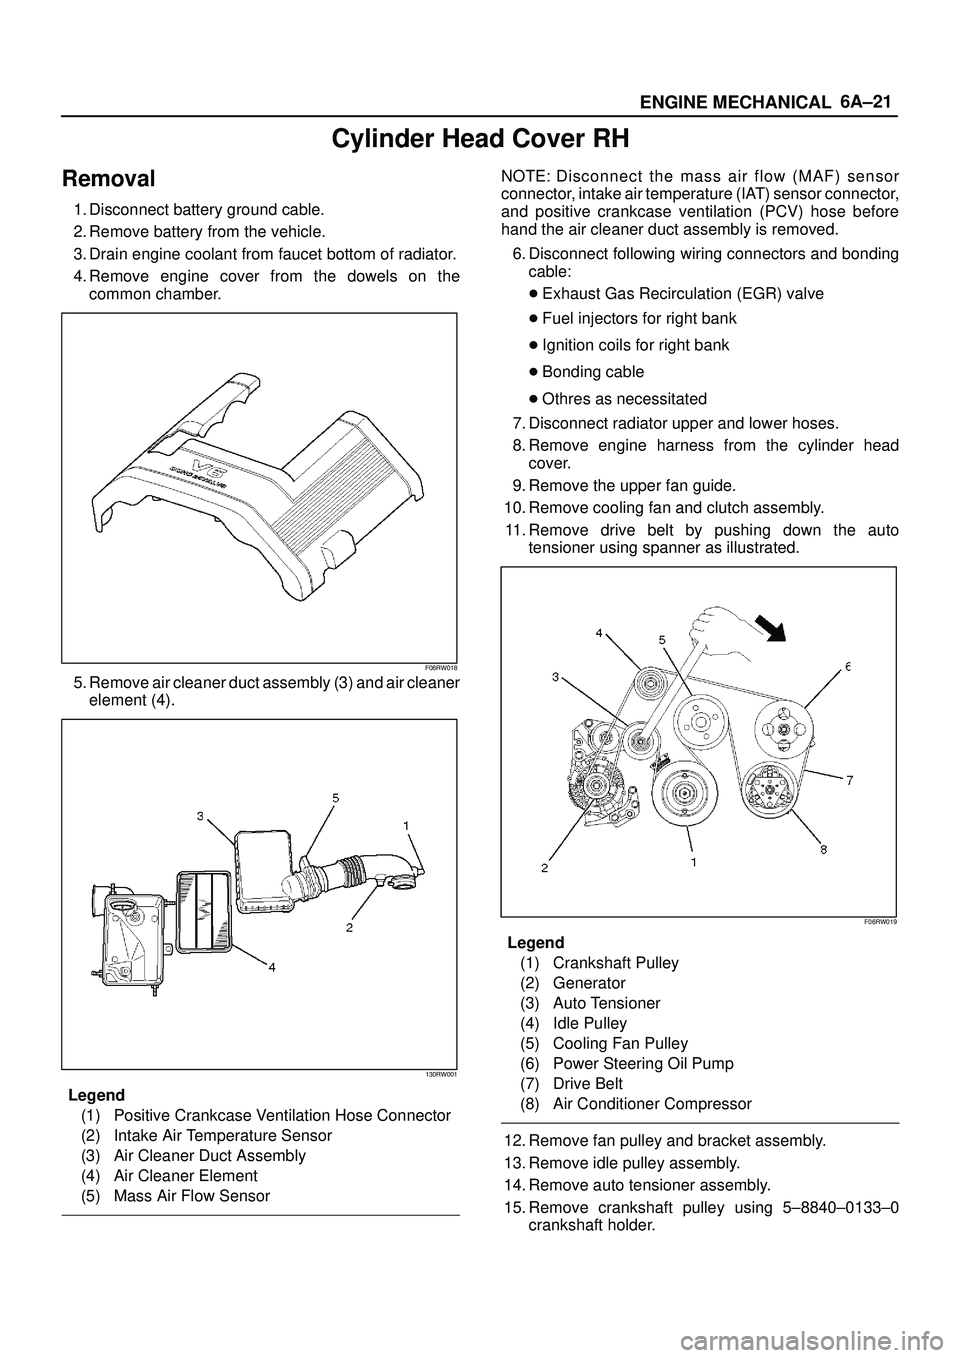 ISUZU TROOPER 1998  Service Repair Manual 6A±21
ENGINE MECHANICAL
Cylinder Head Cover RH
Removal
1. Disconnect battery ground cable.
2. Remove battery from the vehicle.
3. Drain engine coolant from faucet bottom of radiator.
4. Remove engine